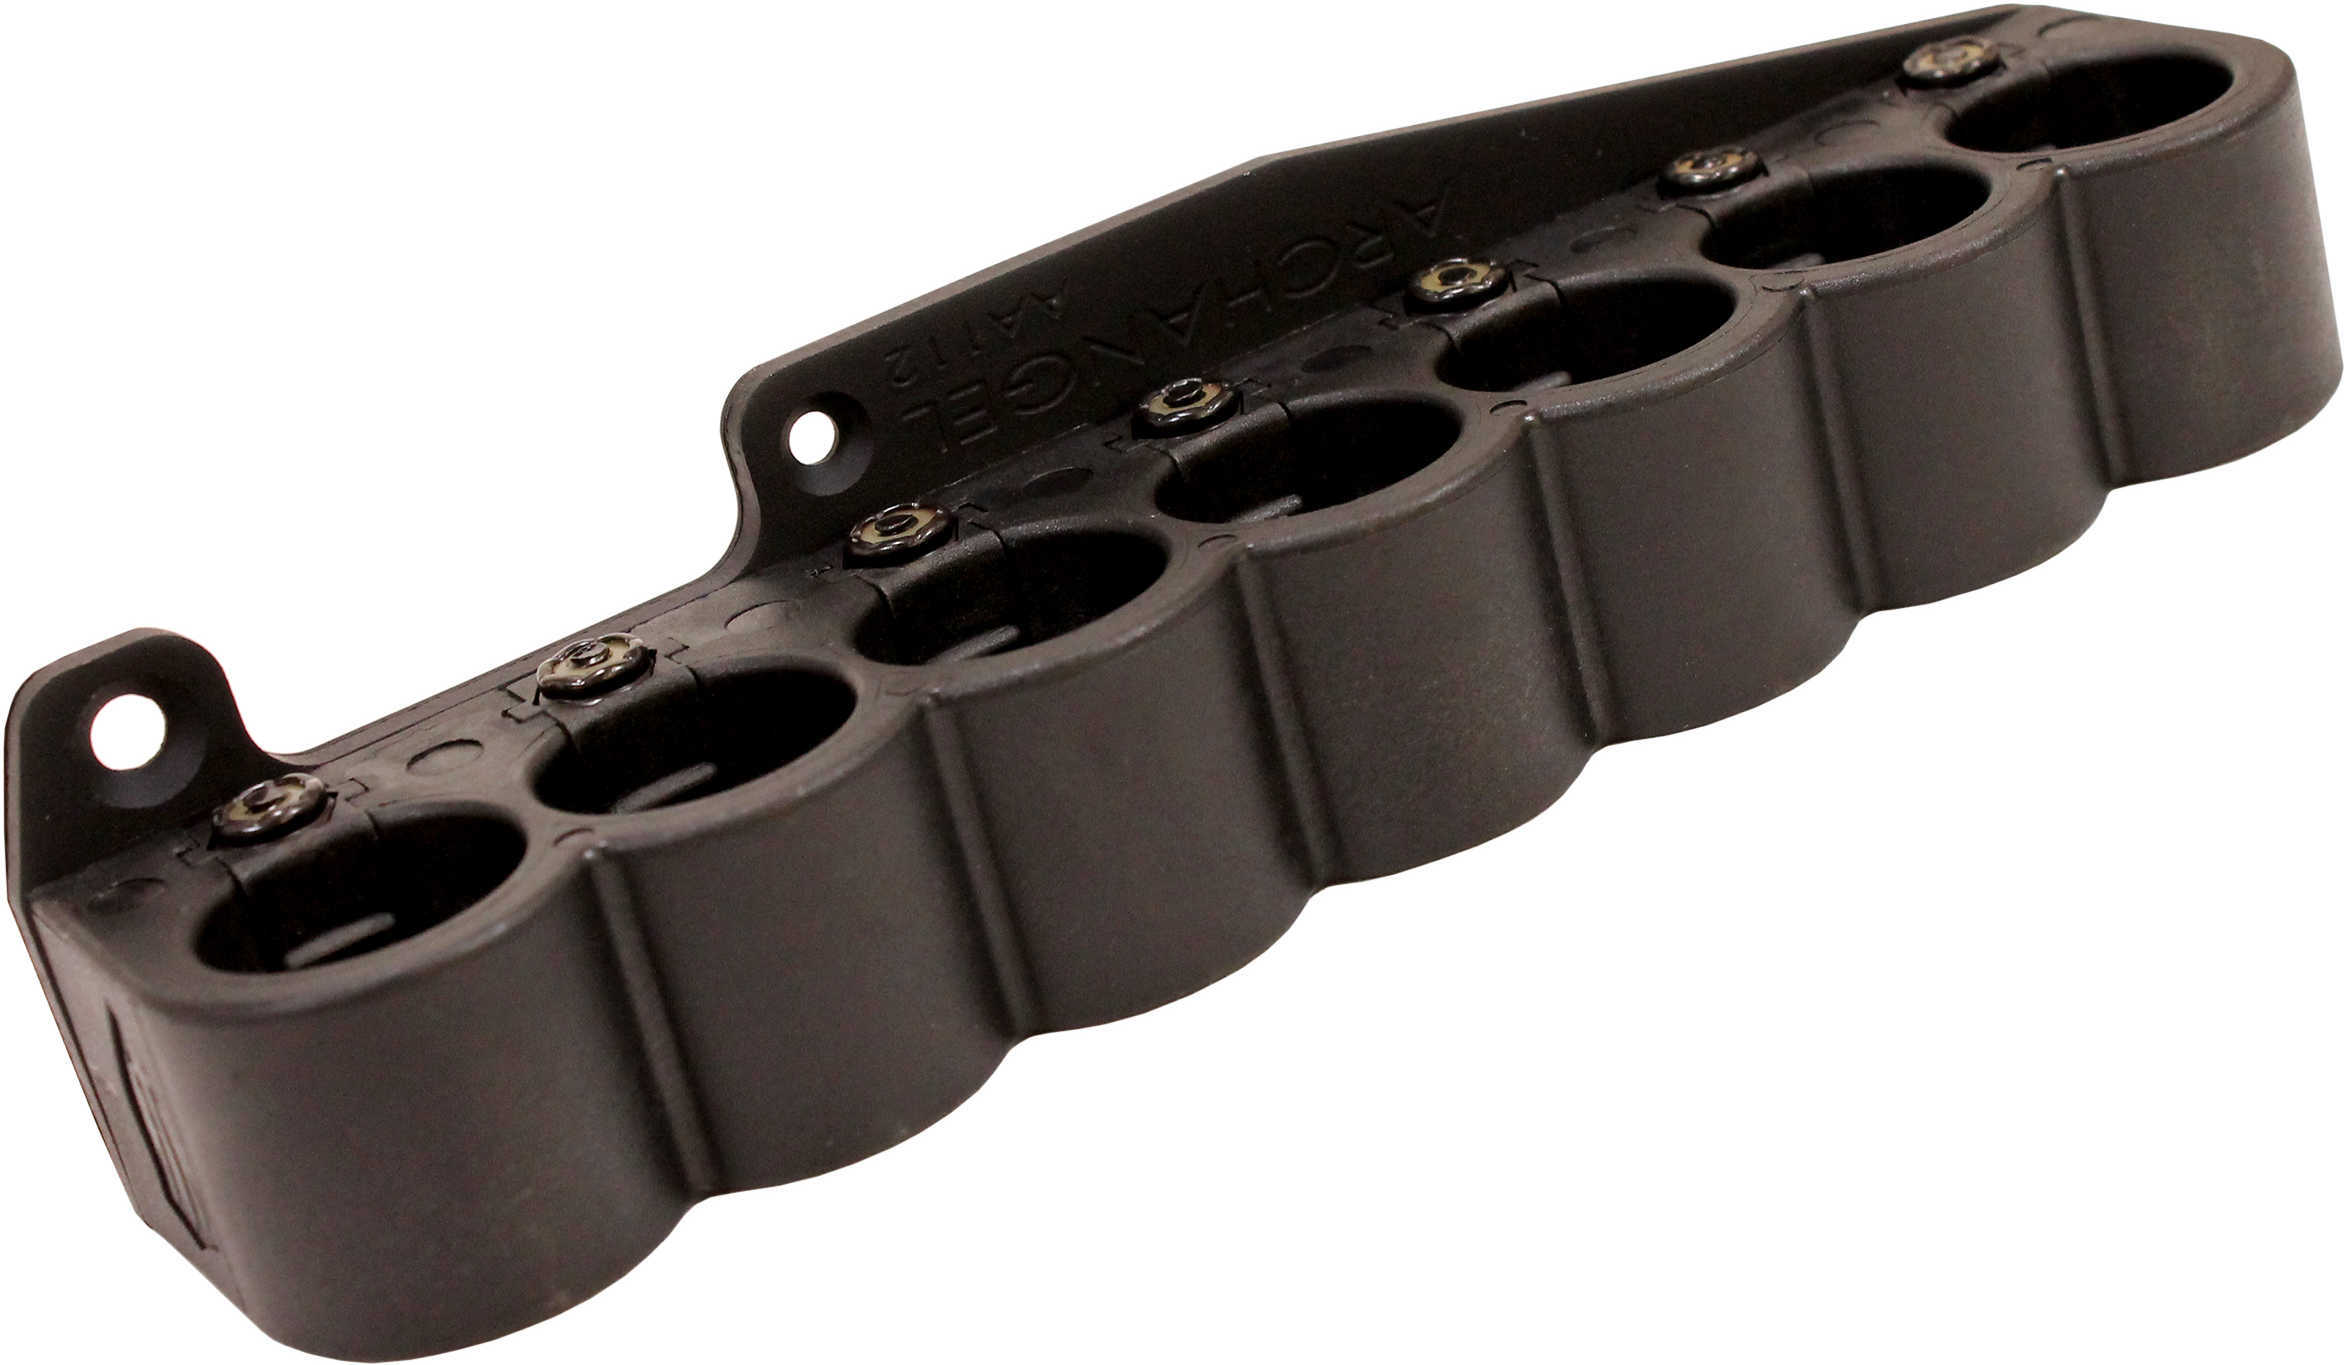 ProMag AA112 Archangel Shell Carrier 12 Gauge Remington 870 Black Polymer with Aluminum Mounting Plate